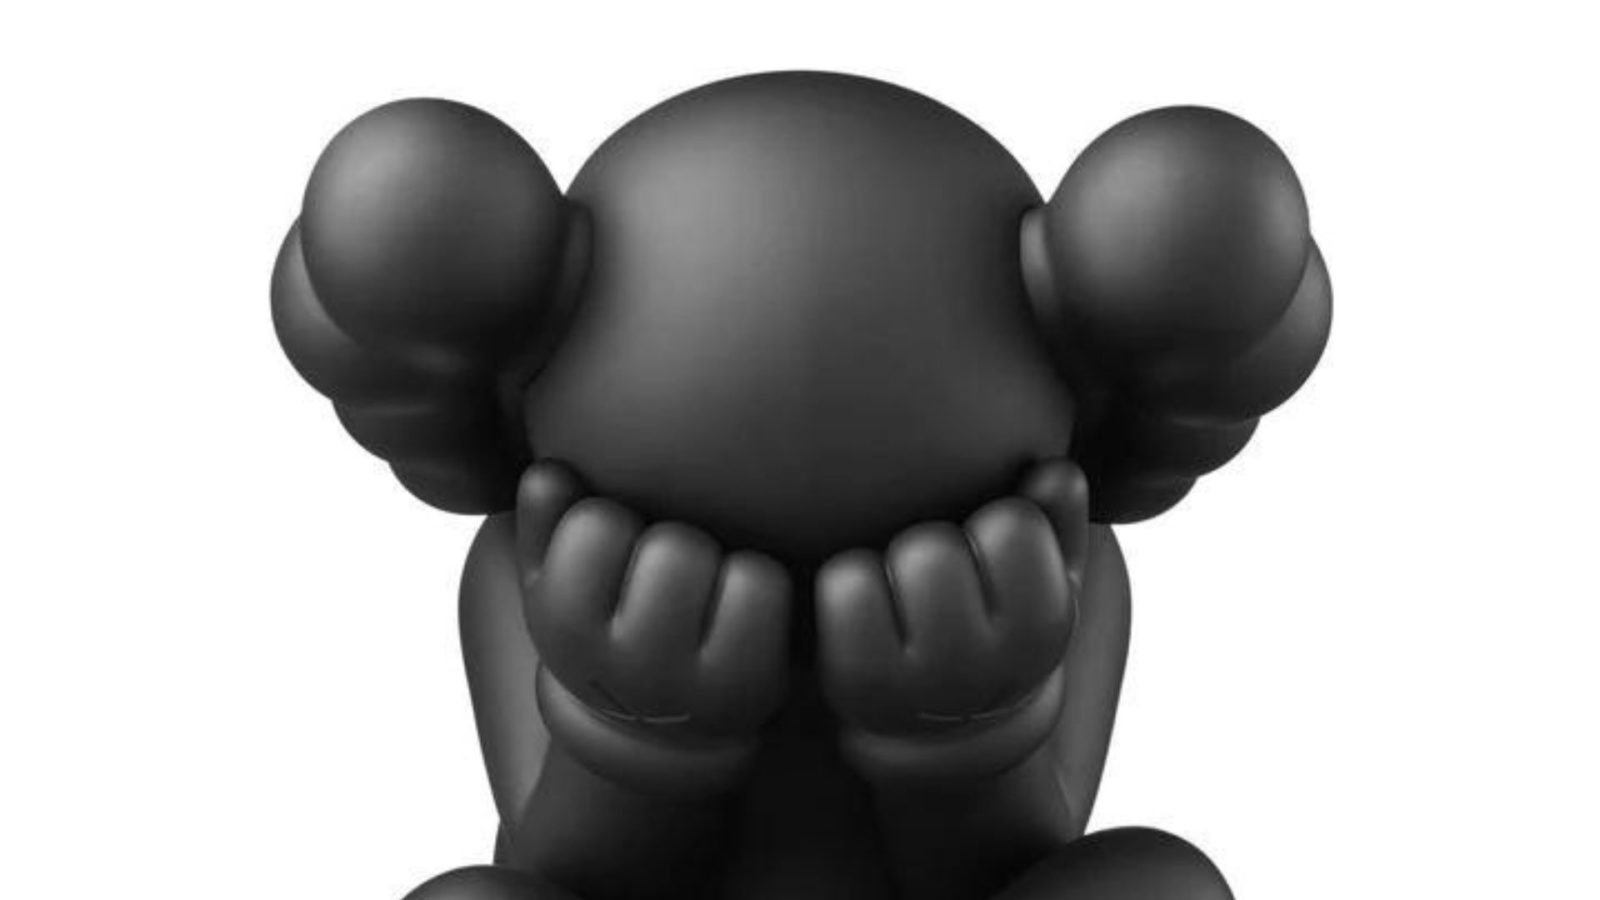 10 artists like KAWS and where to buy their artworks